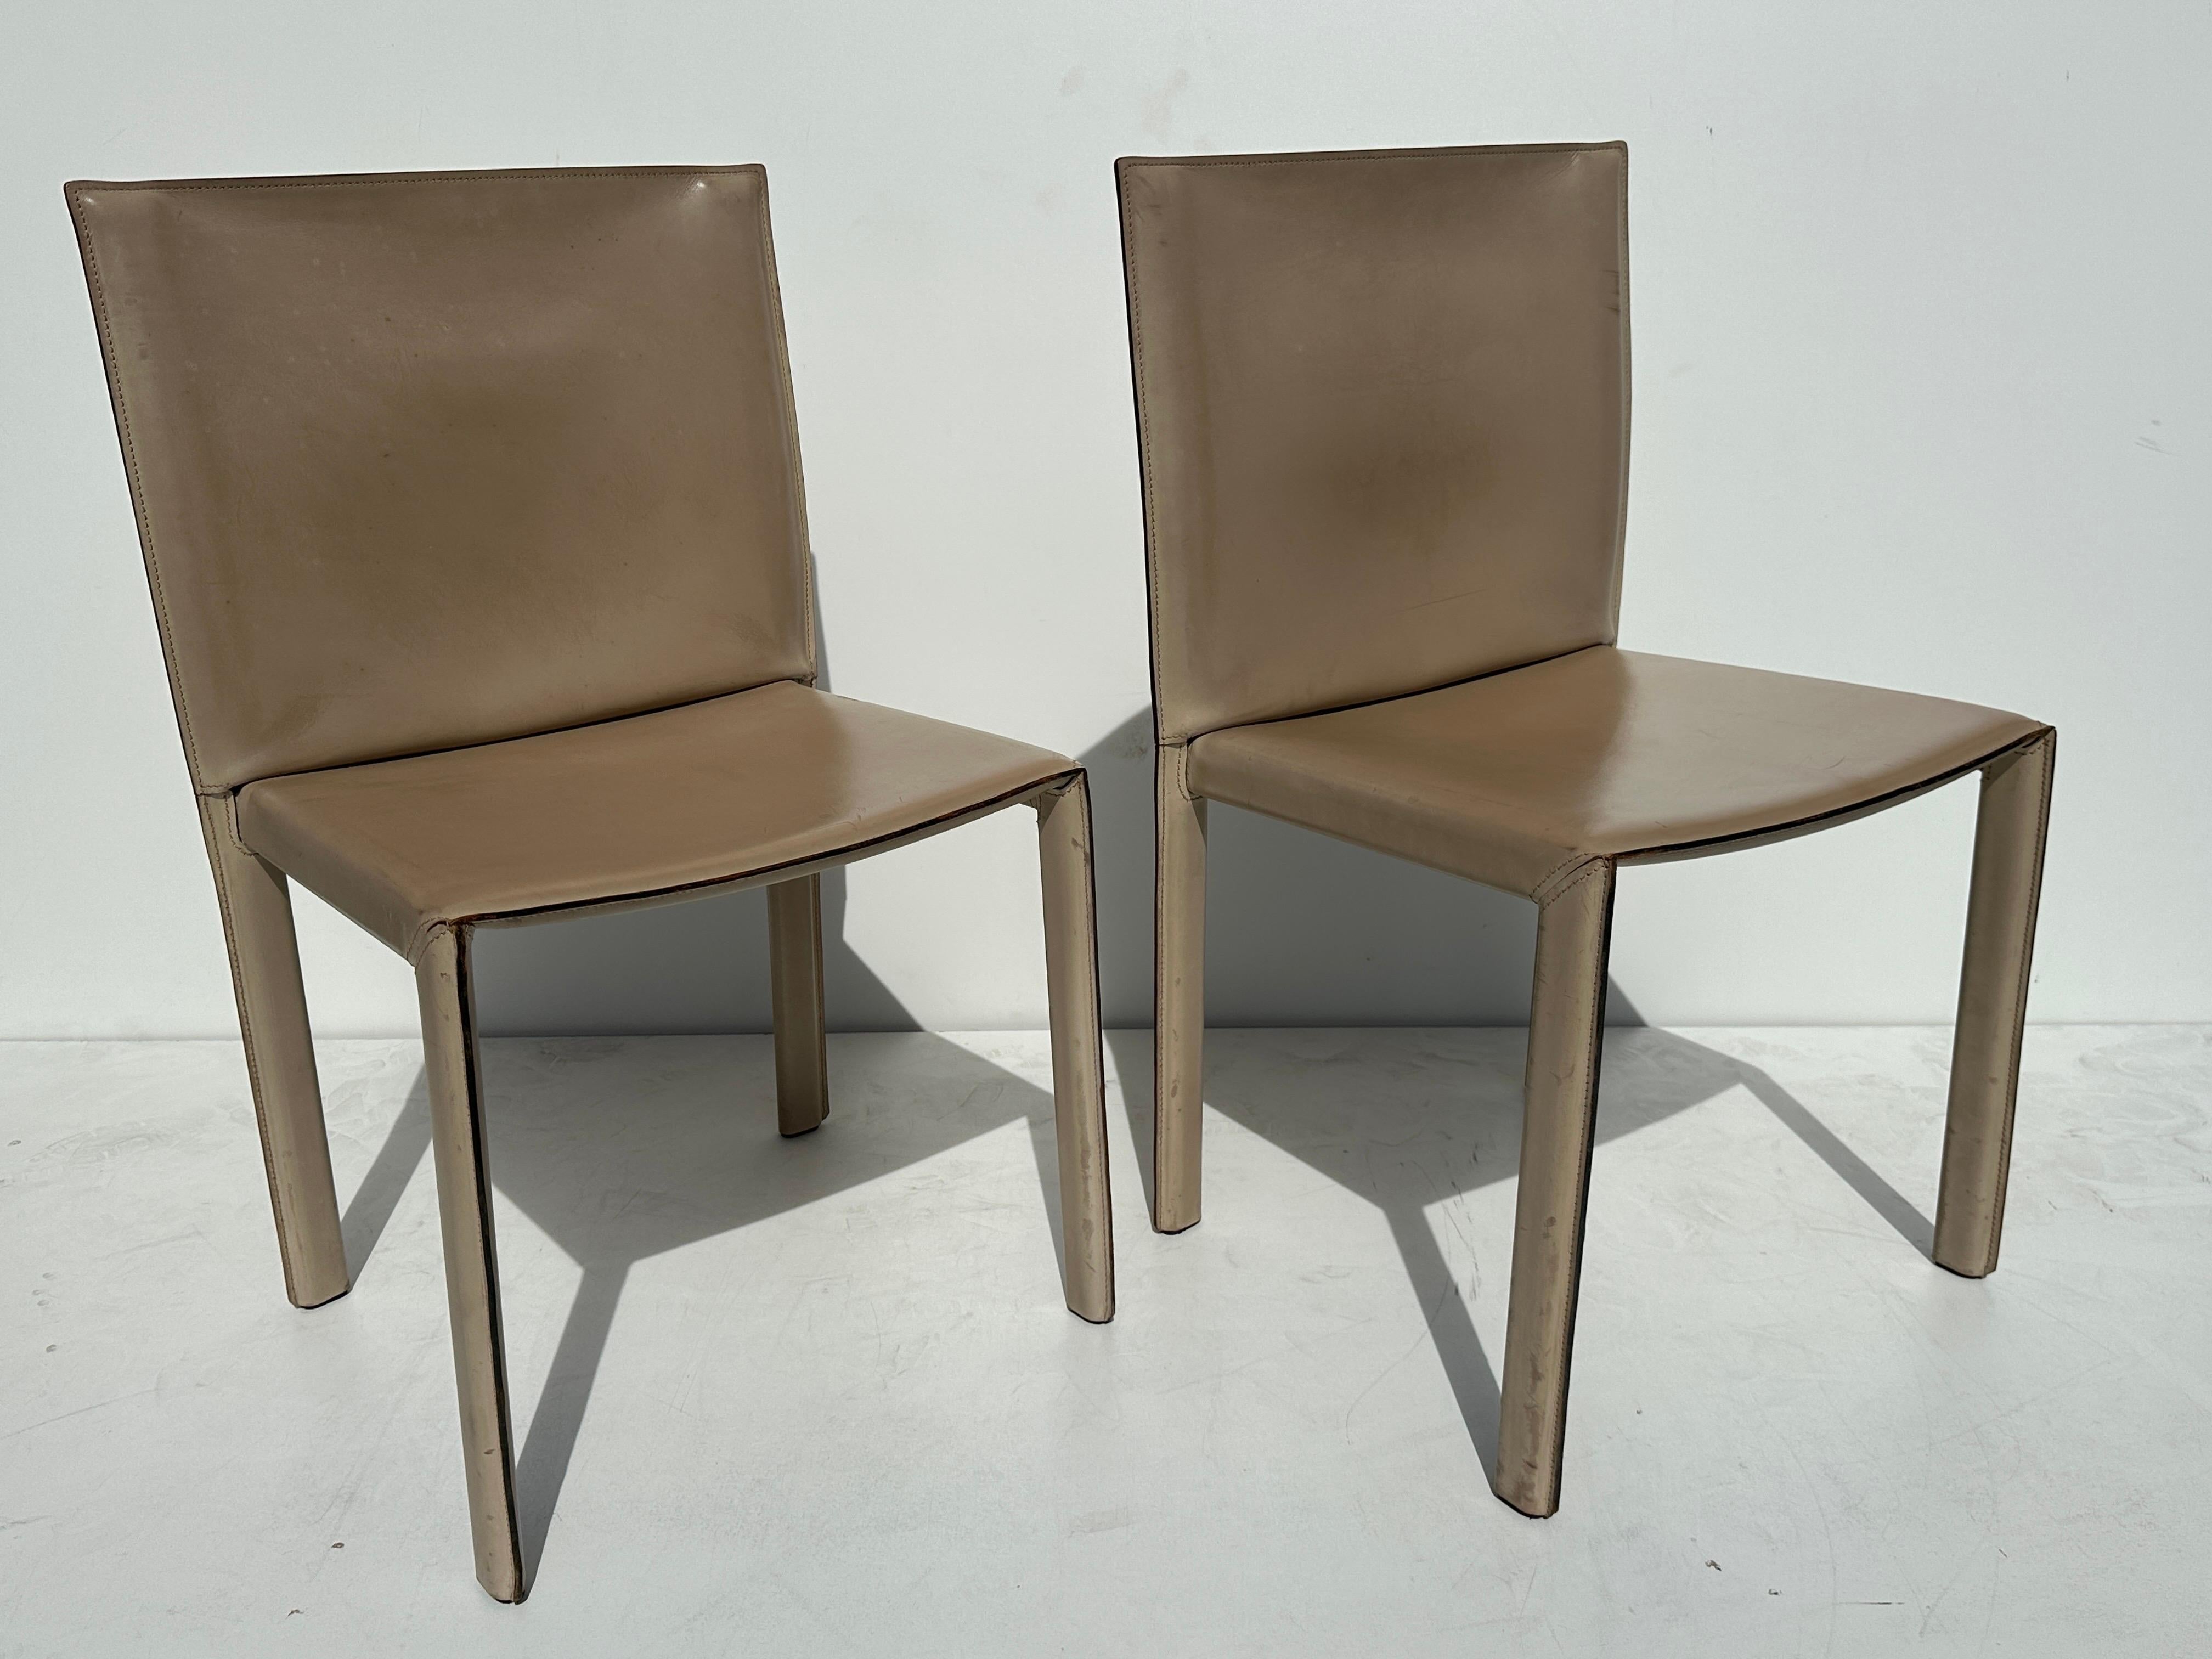 Pair of patinated saddle stitched leather side chairs by Enrico Pellizzoni.
All stitching are intact with no tears. Normal wear of use with beautiful natural patina.